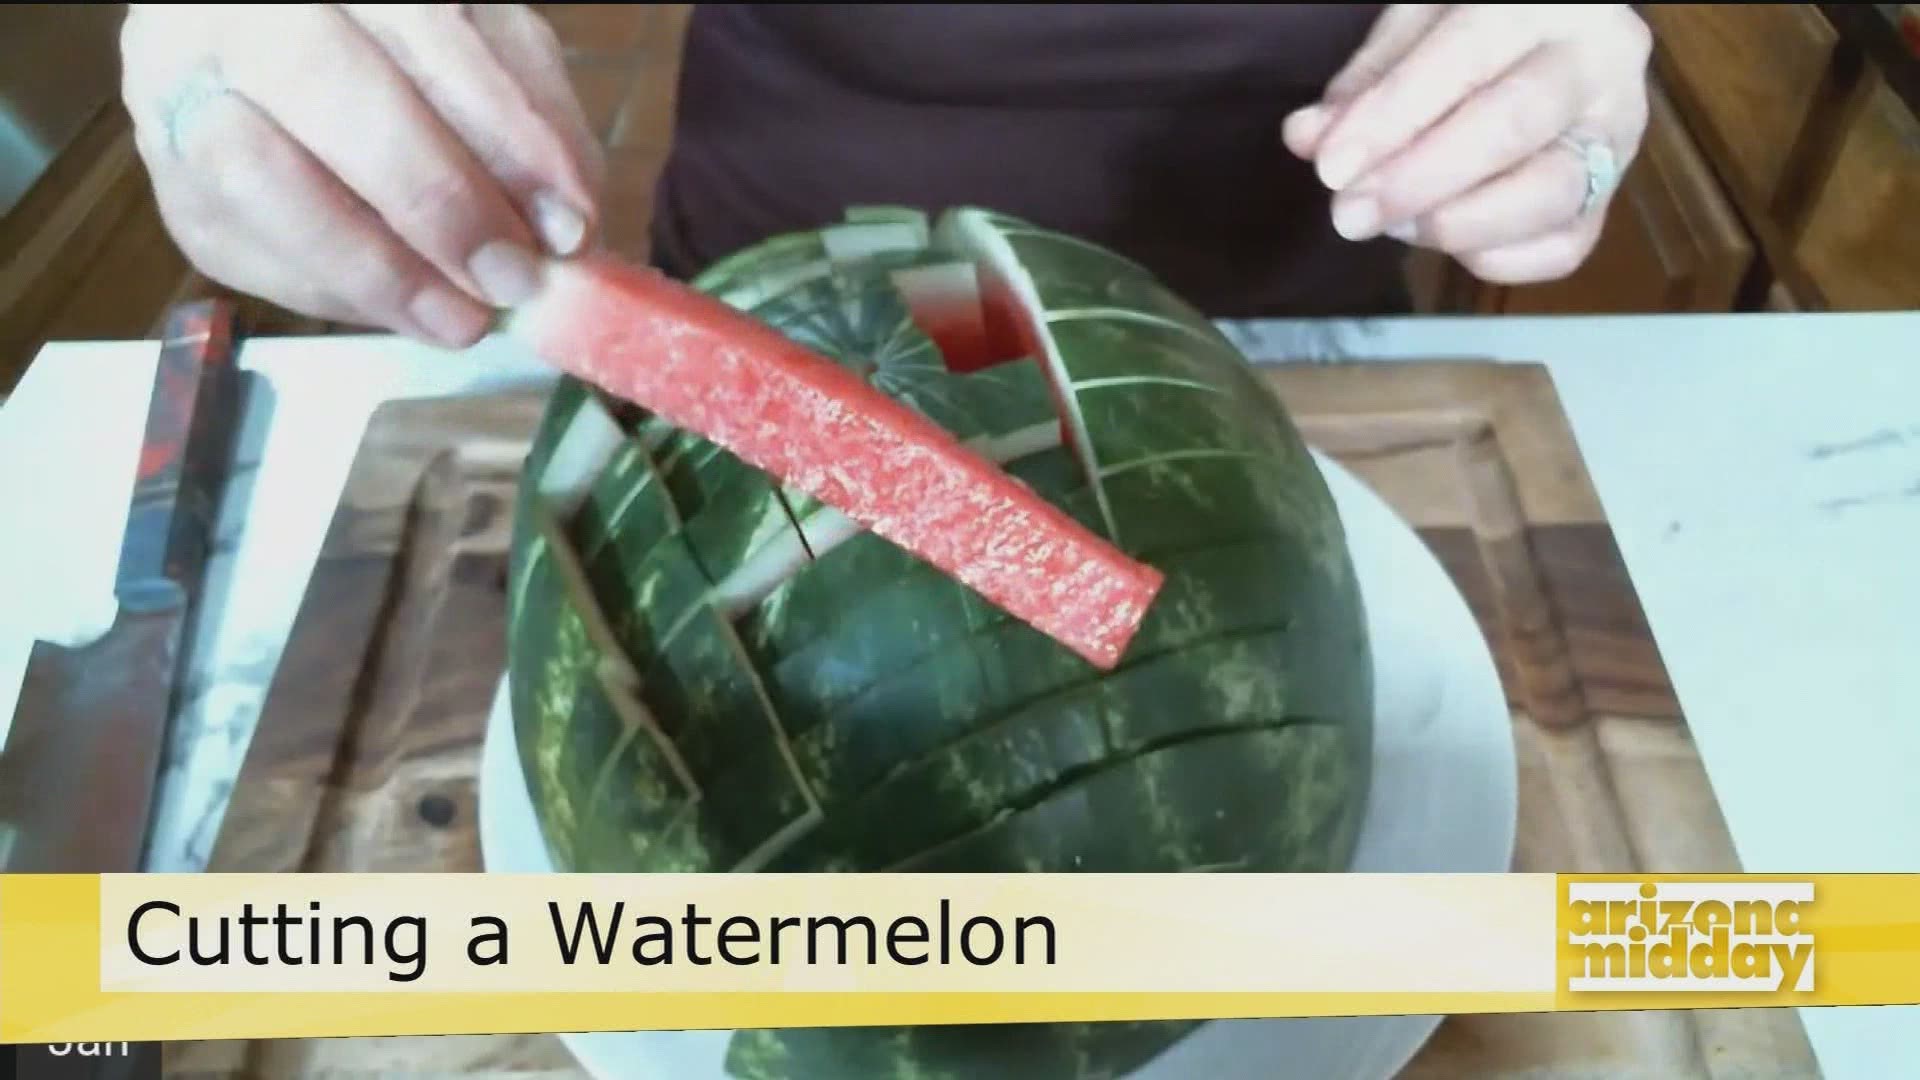 Jan shows us an easy way to cut a watermelon